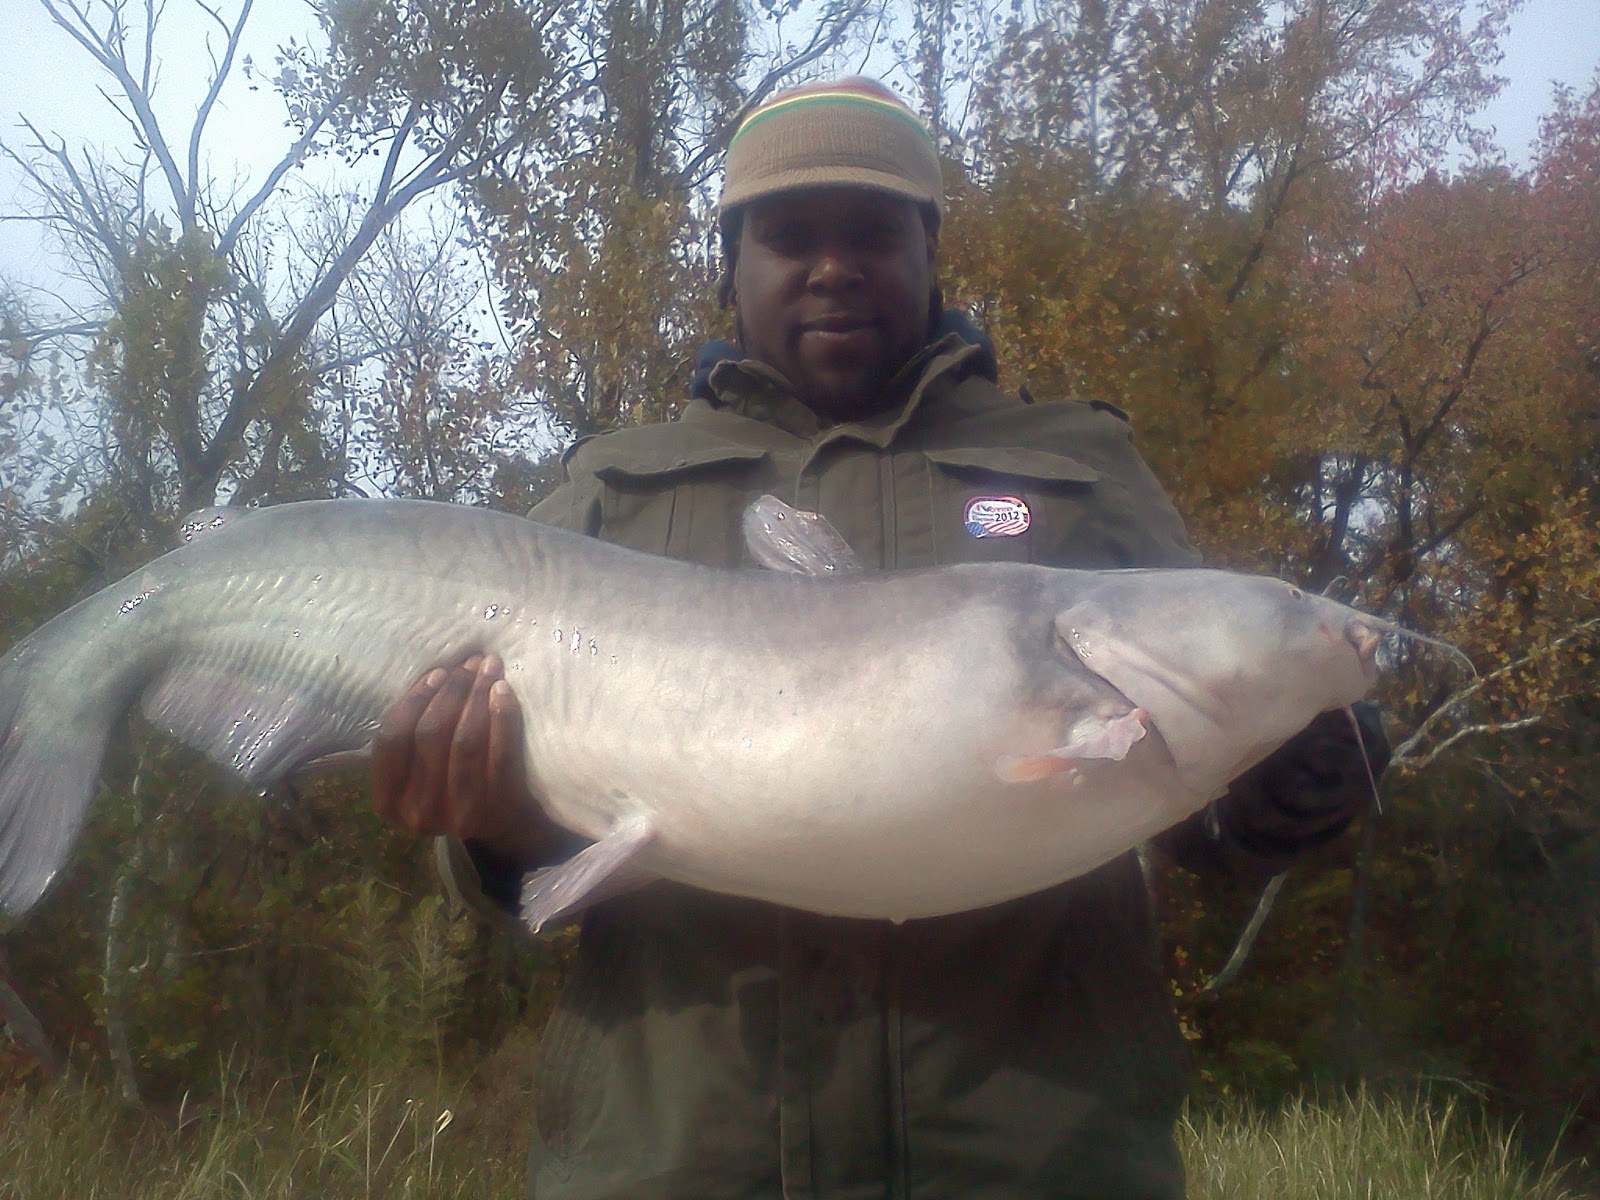 Deonta Gail is the MAN holding the fish and he also had a 32lb and a ...